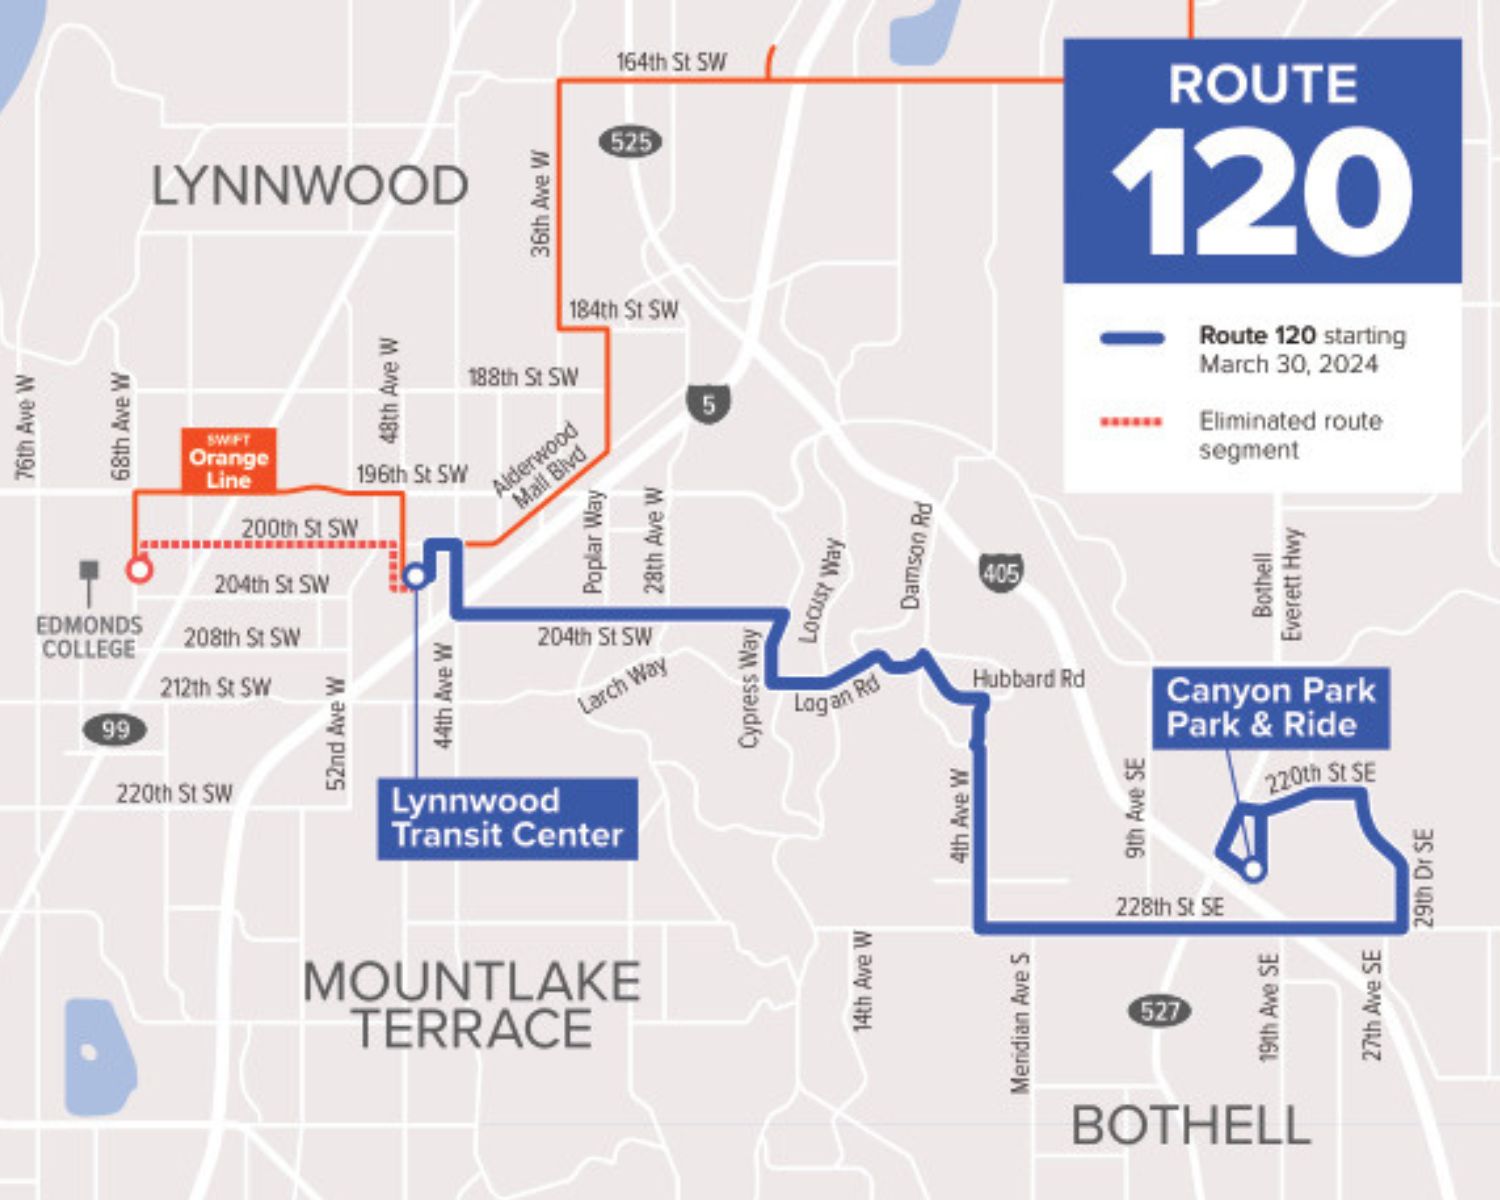 Route 120 will travel from Canyon Park Park & Ride to Lynnwood Transit Center. Then you can take the Swift Orange Line to Edmonds College.